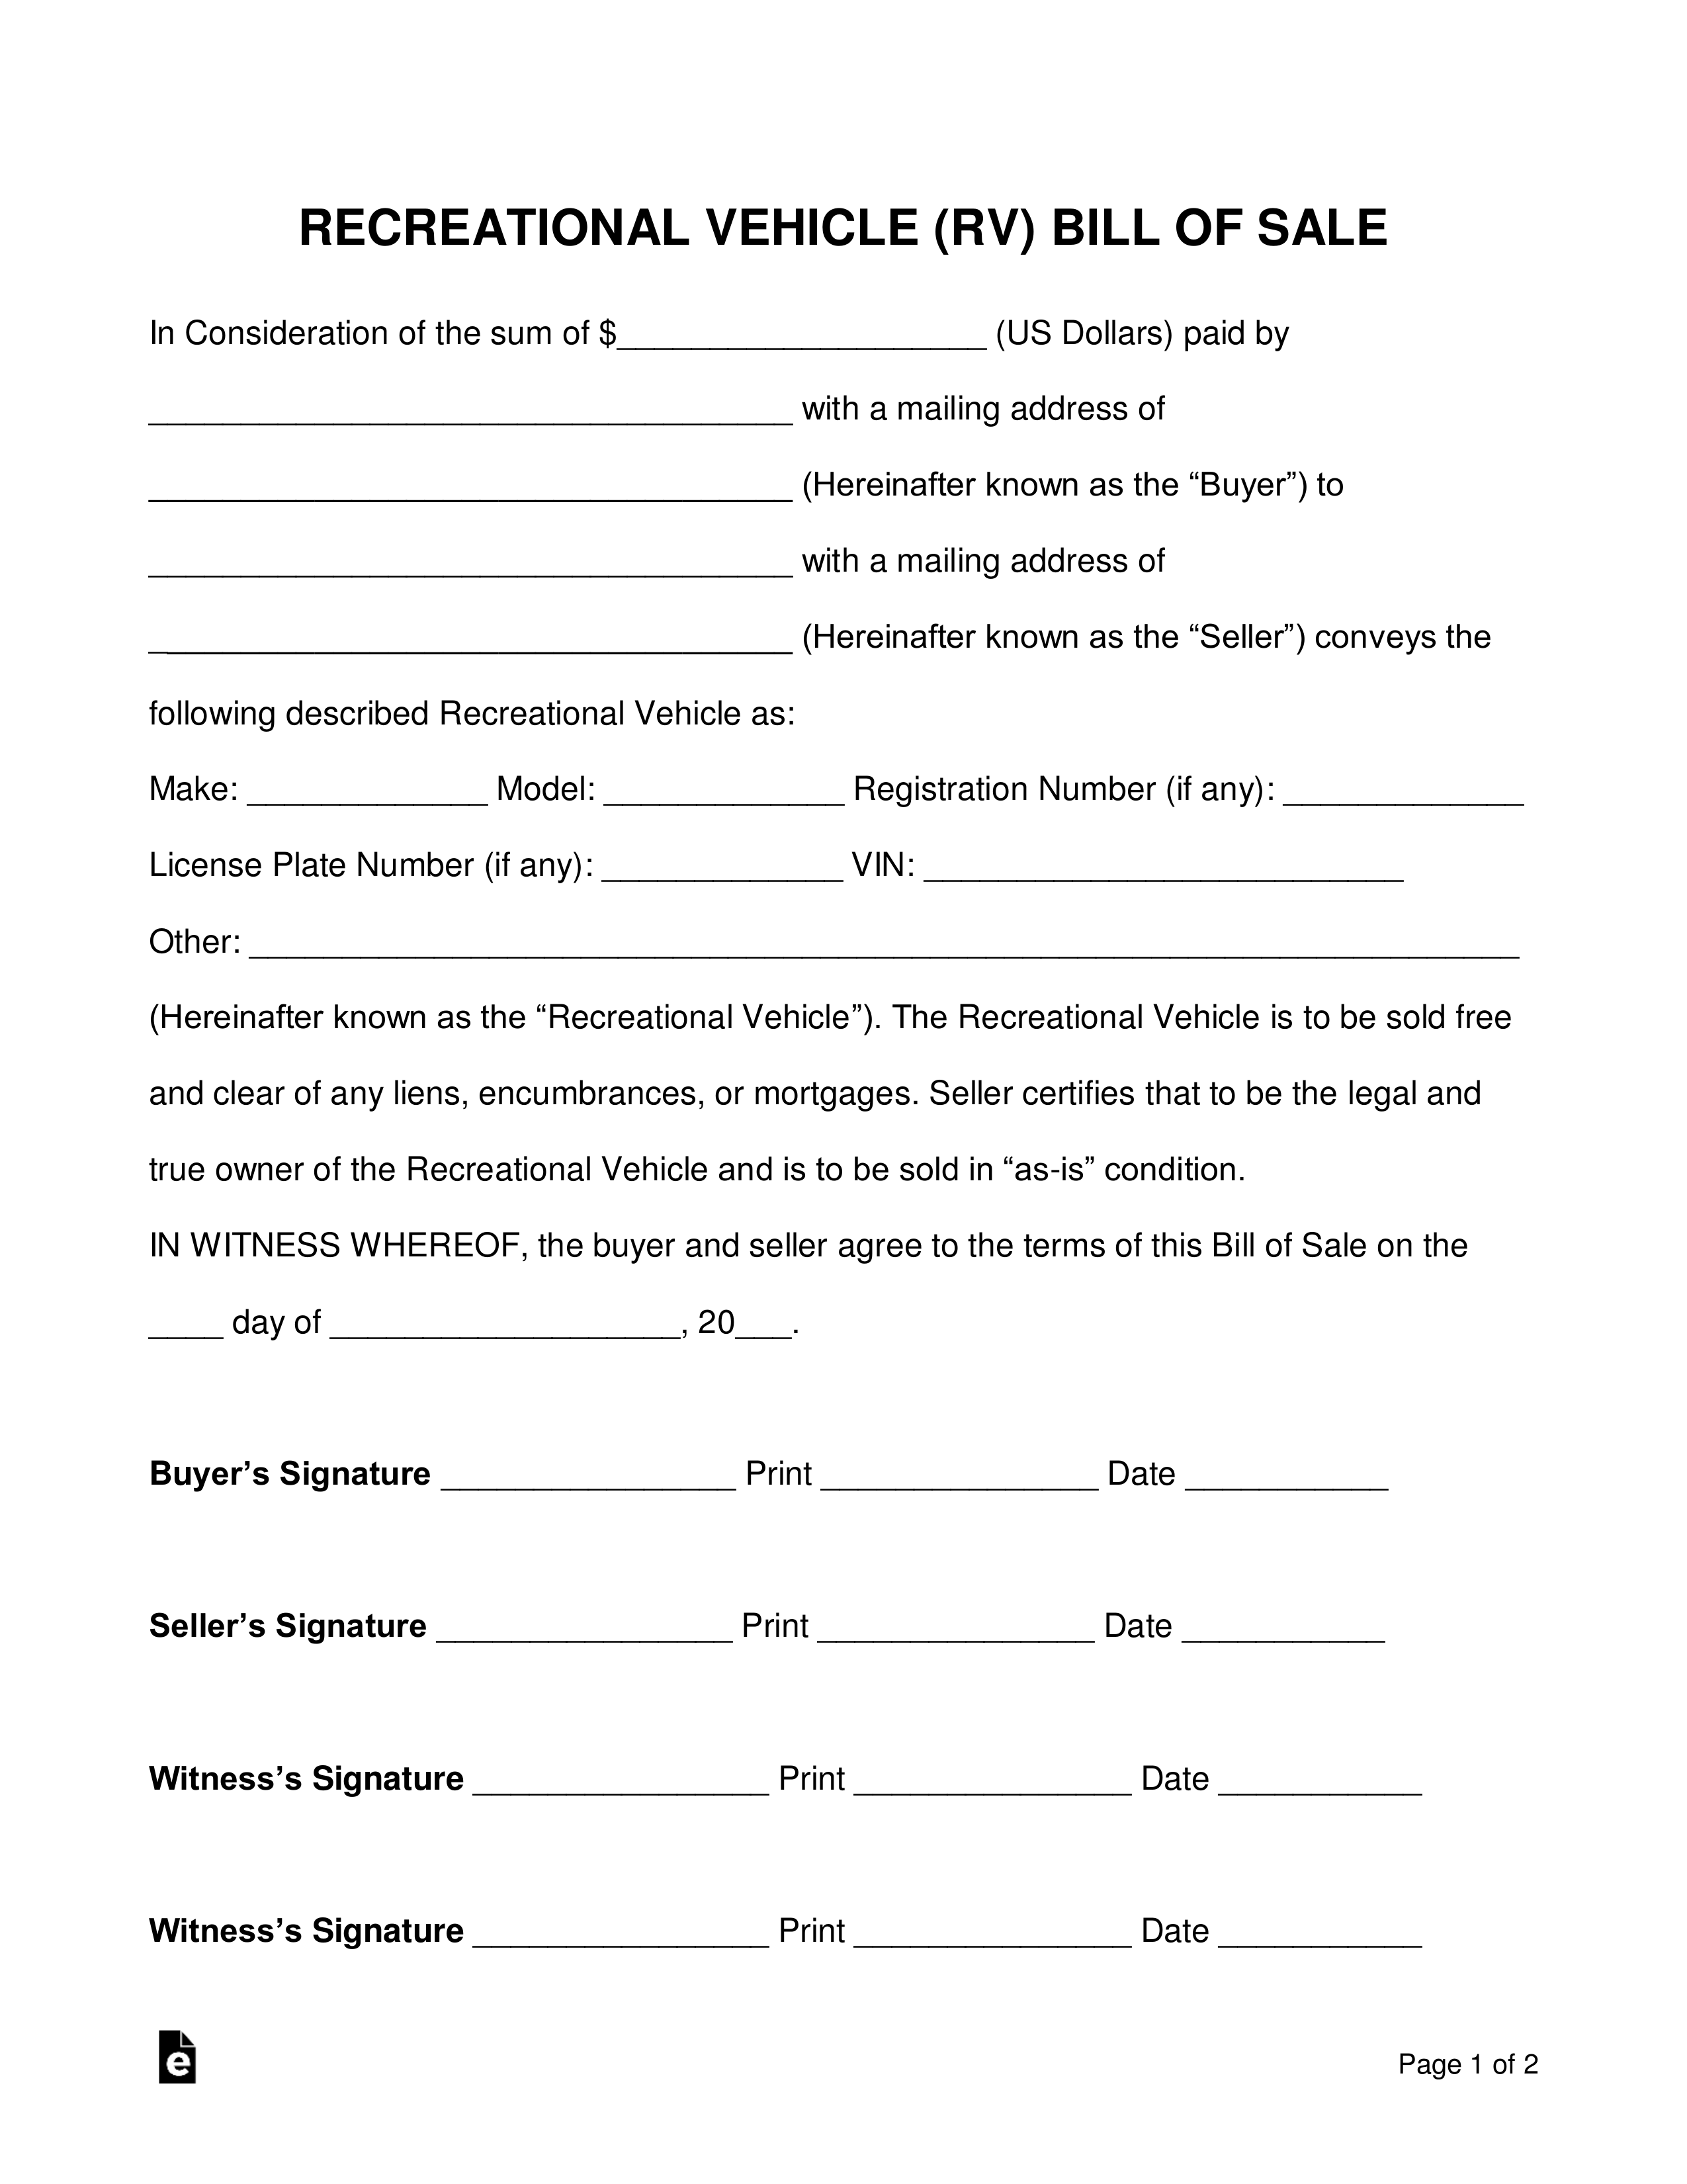 Free Recreational Vehicle (RV) Bill of Sale Form - Word  PDF – eForms With Deposit Form For Bill Of Sale Pertaining To Deposit Form For Bill Of Sale